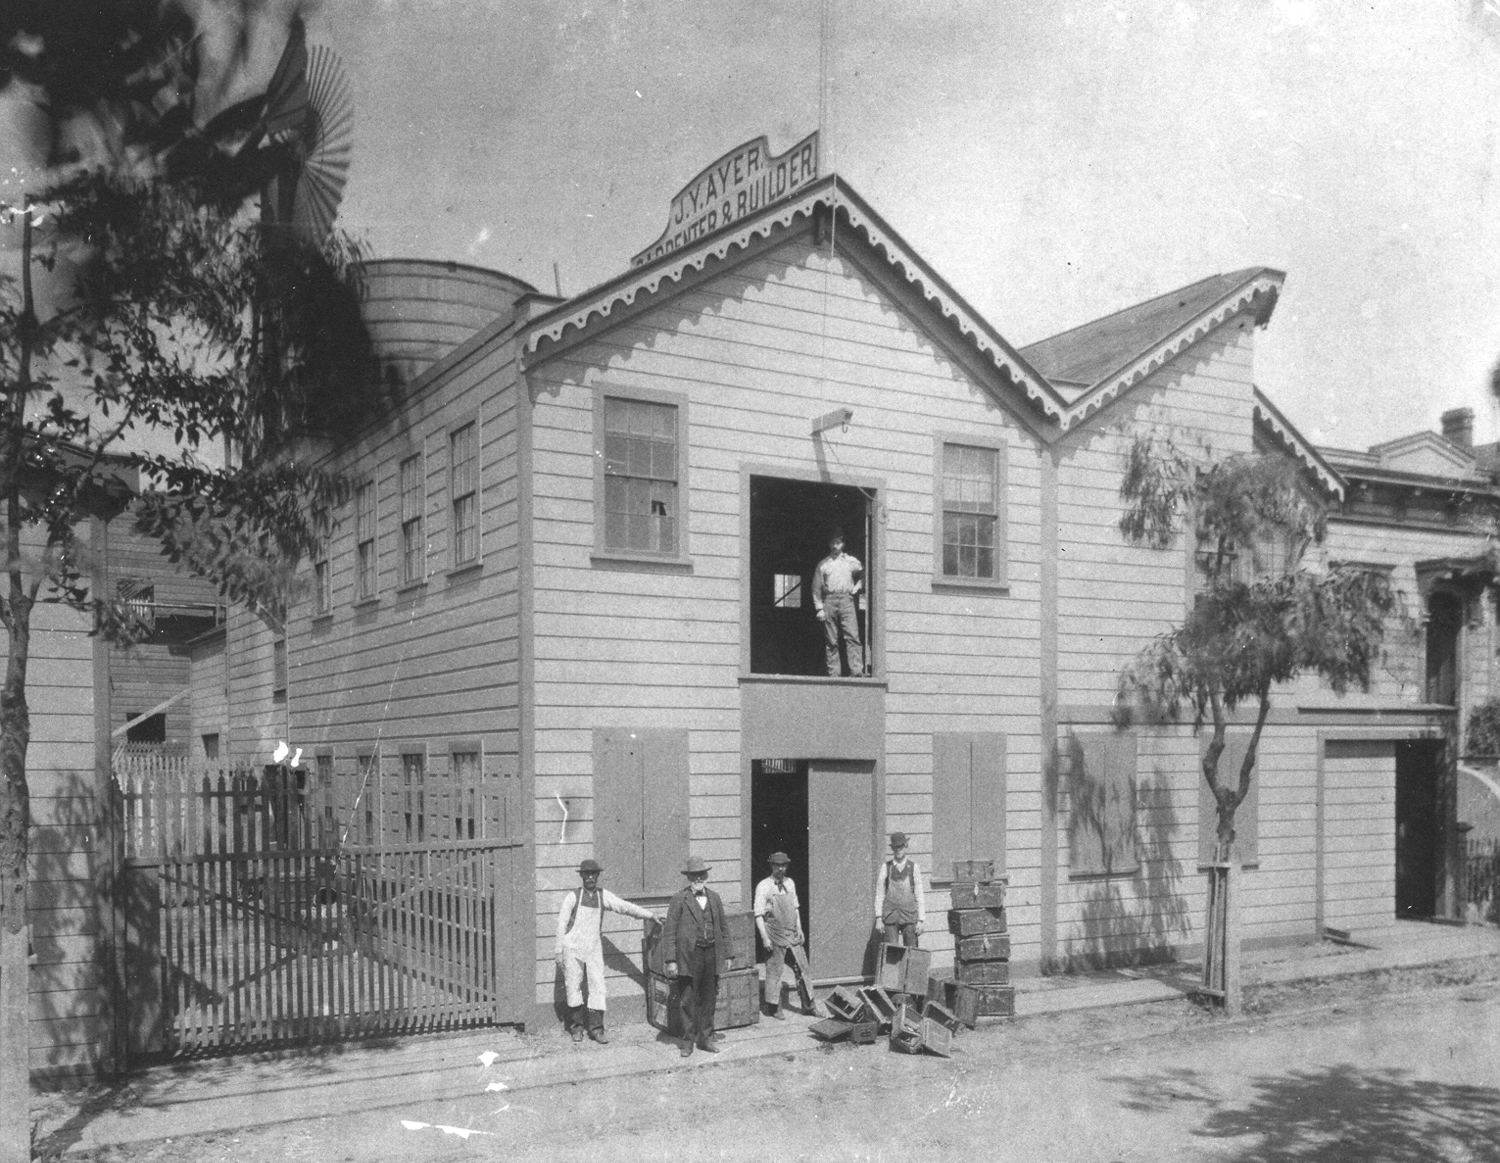 A black and white photo of two-story workshop building. Several men stand outside surrounded by wood boxes. One man stands in open loft door above. The sign on top of the building reads J.Y. Ayer Carpenter &Builder.